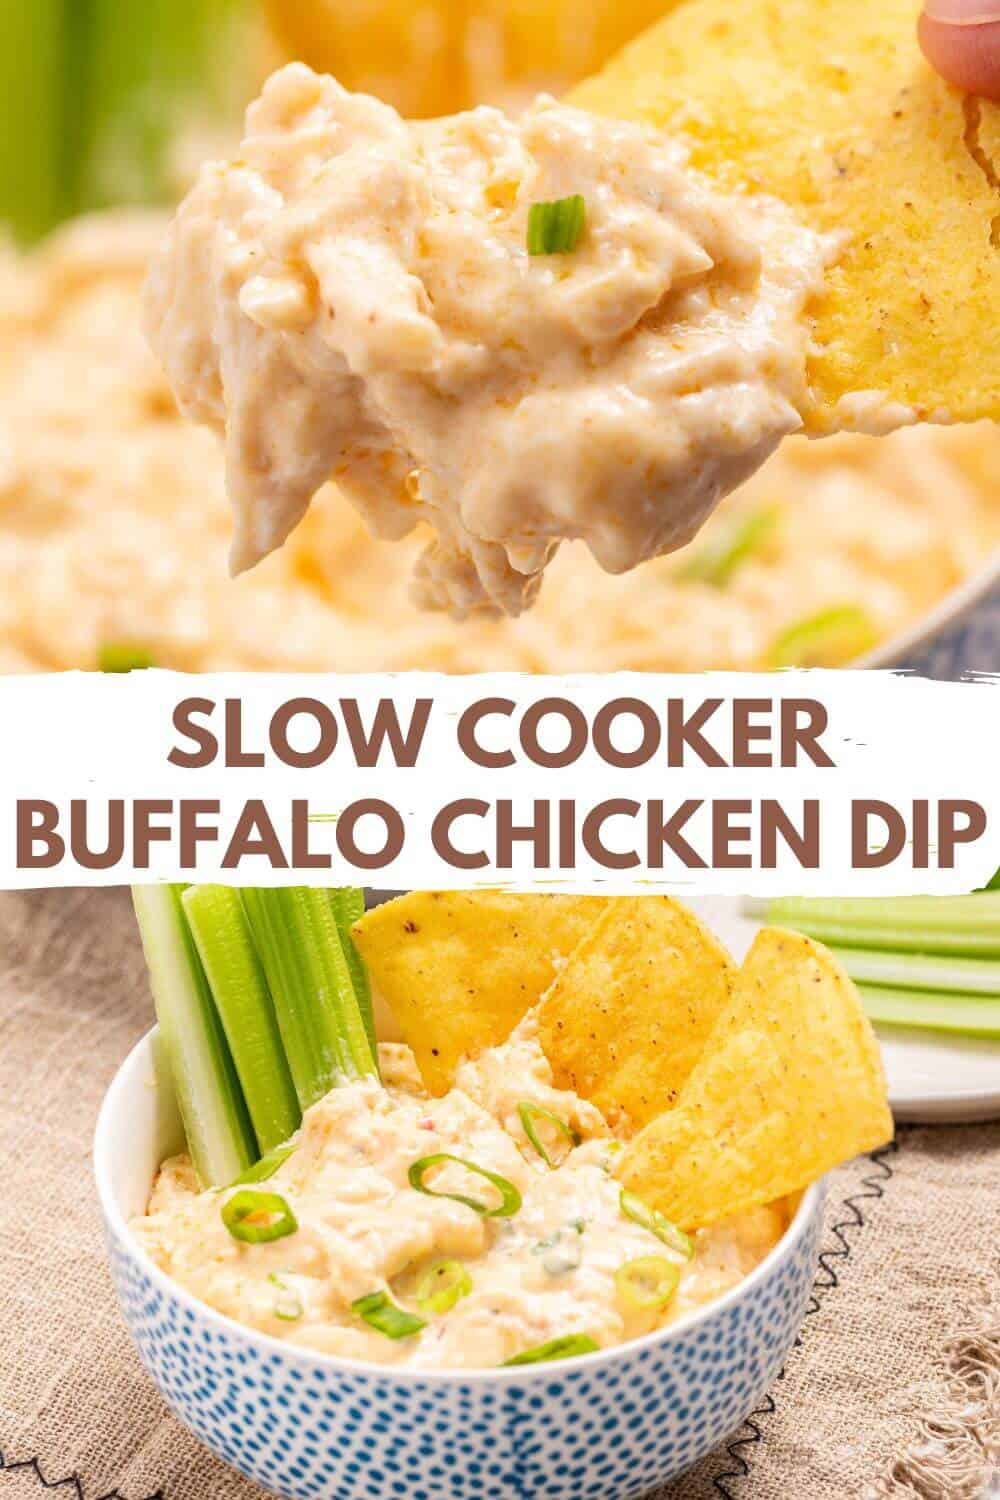 Slow cooker buffalo chicken dip with recipe title text.